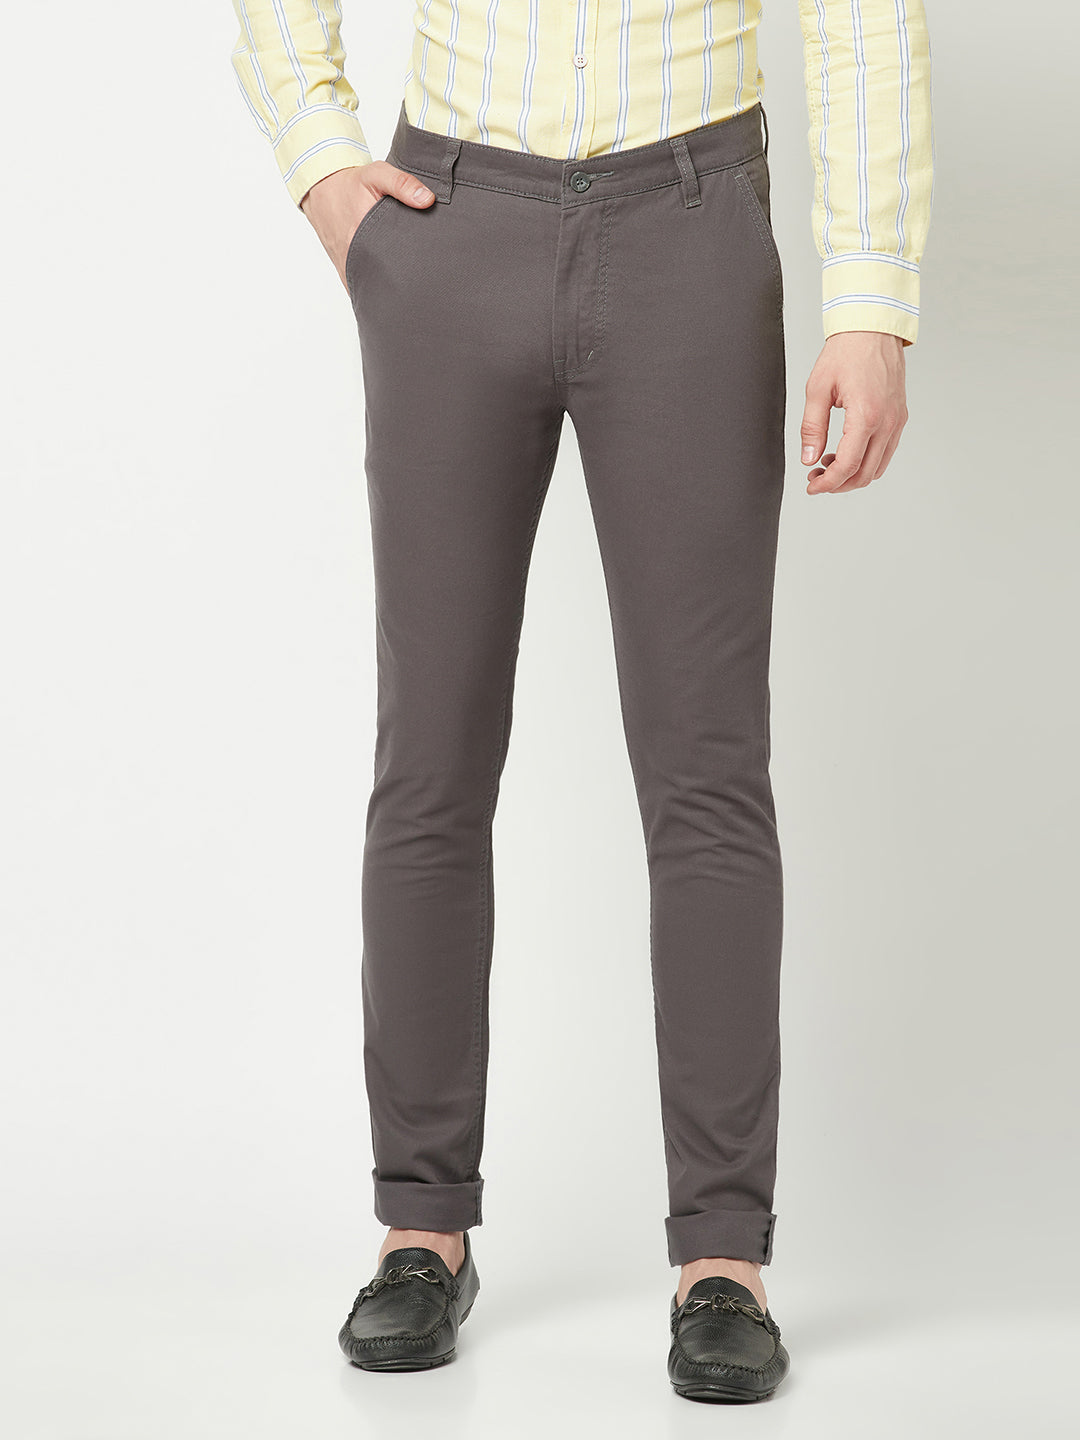  Grey Business Trousers